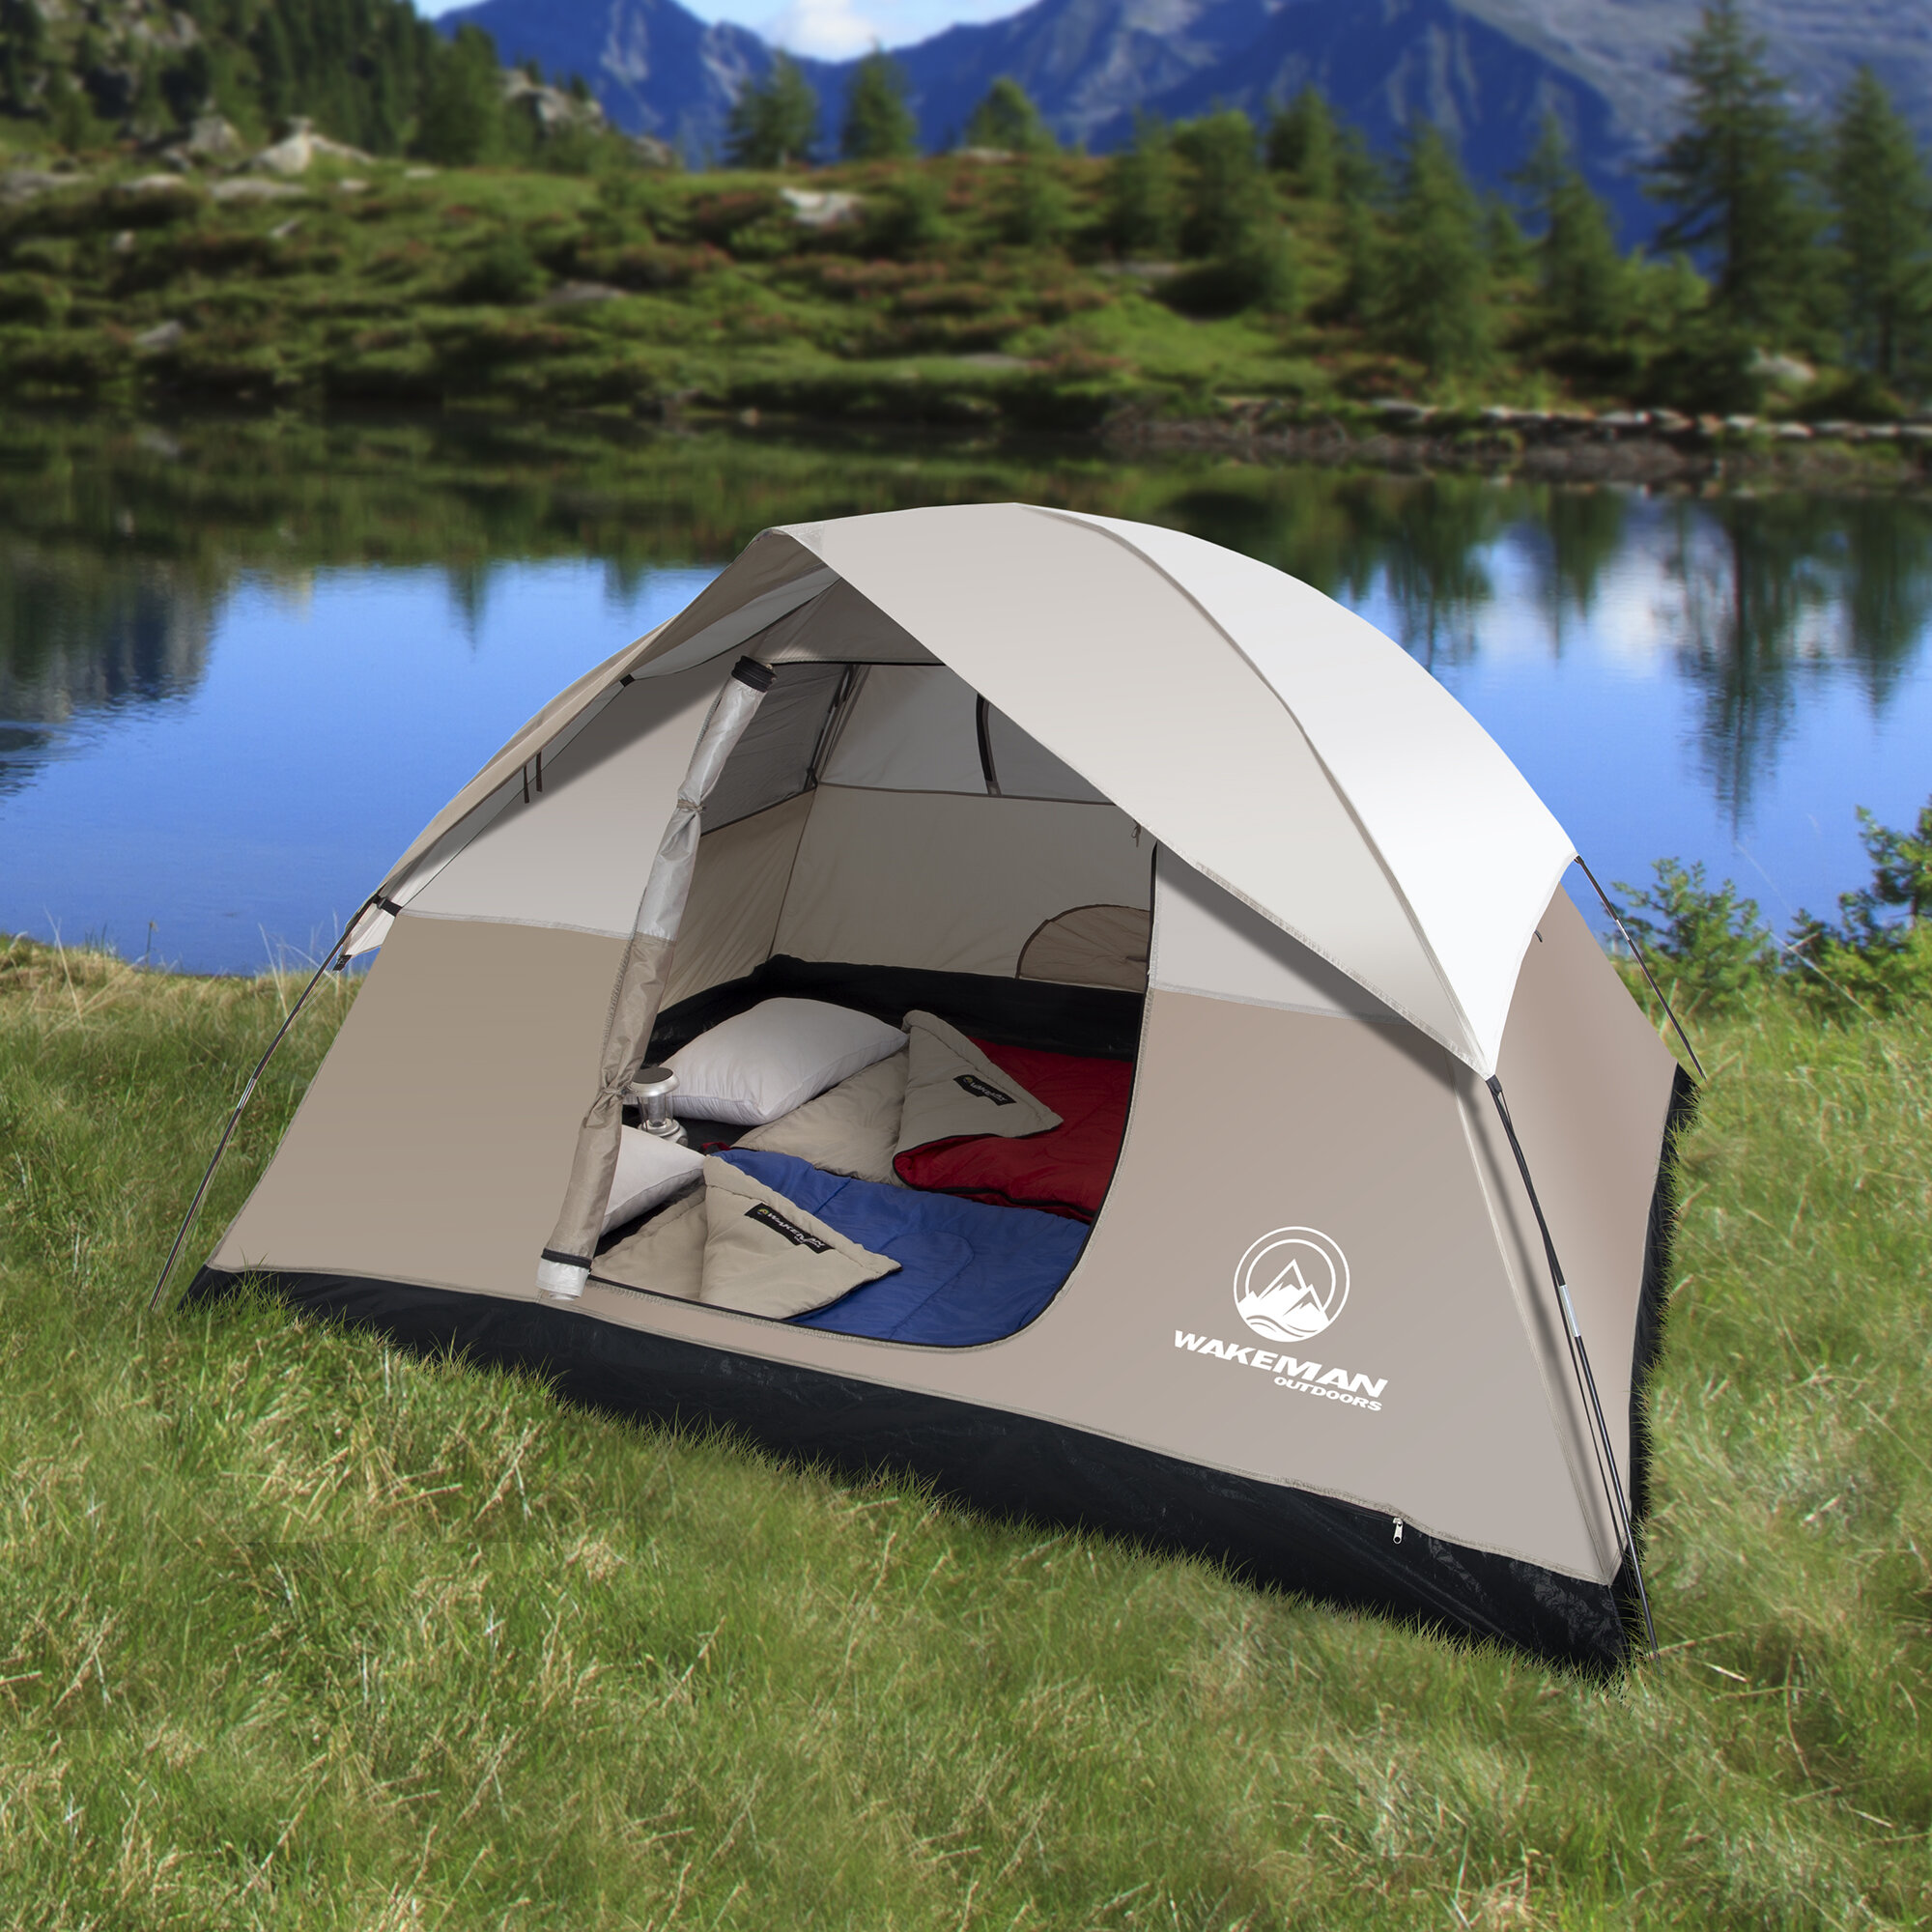 Basics x Dome Camping Tent With Rainfly 9 4-Person Feet